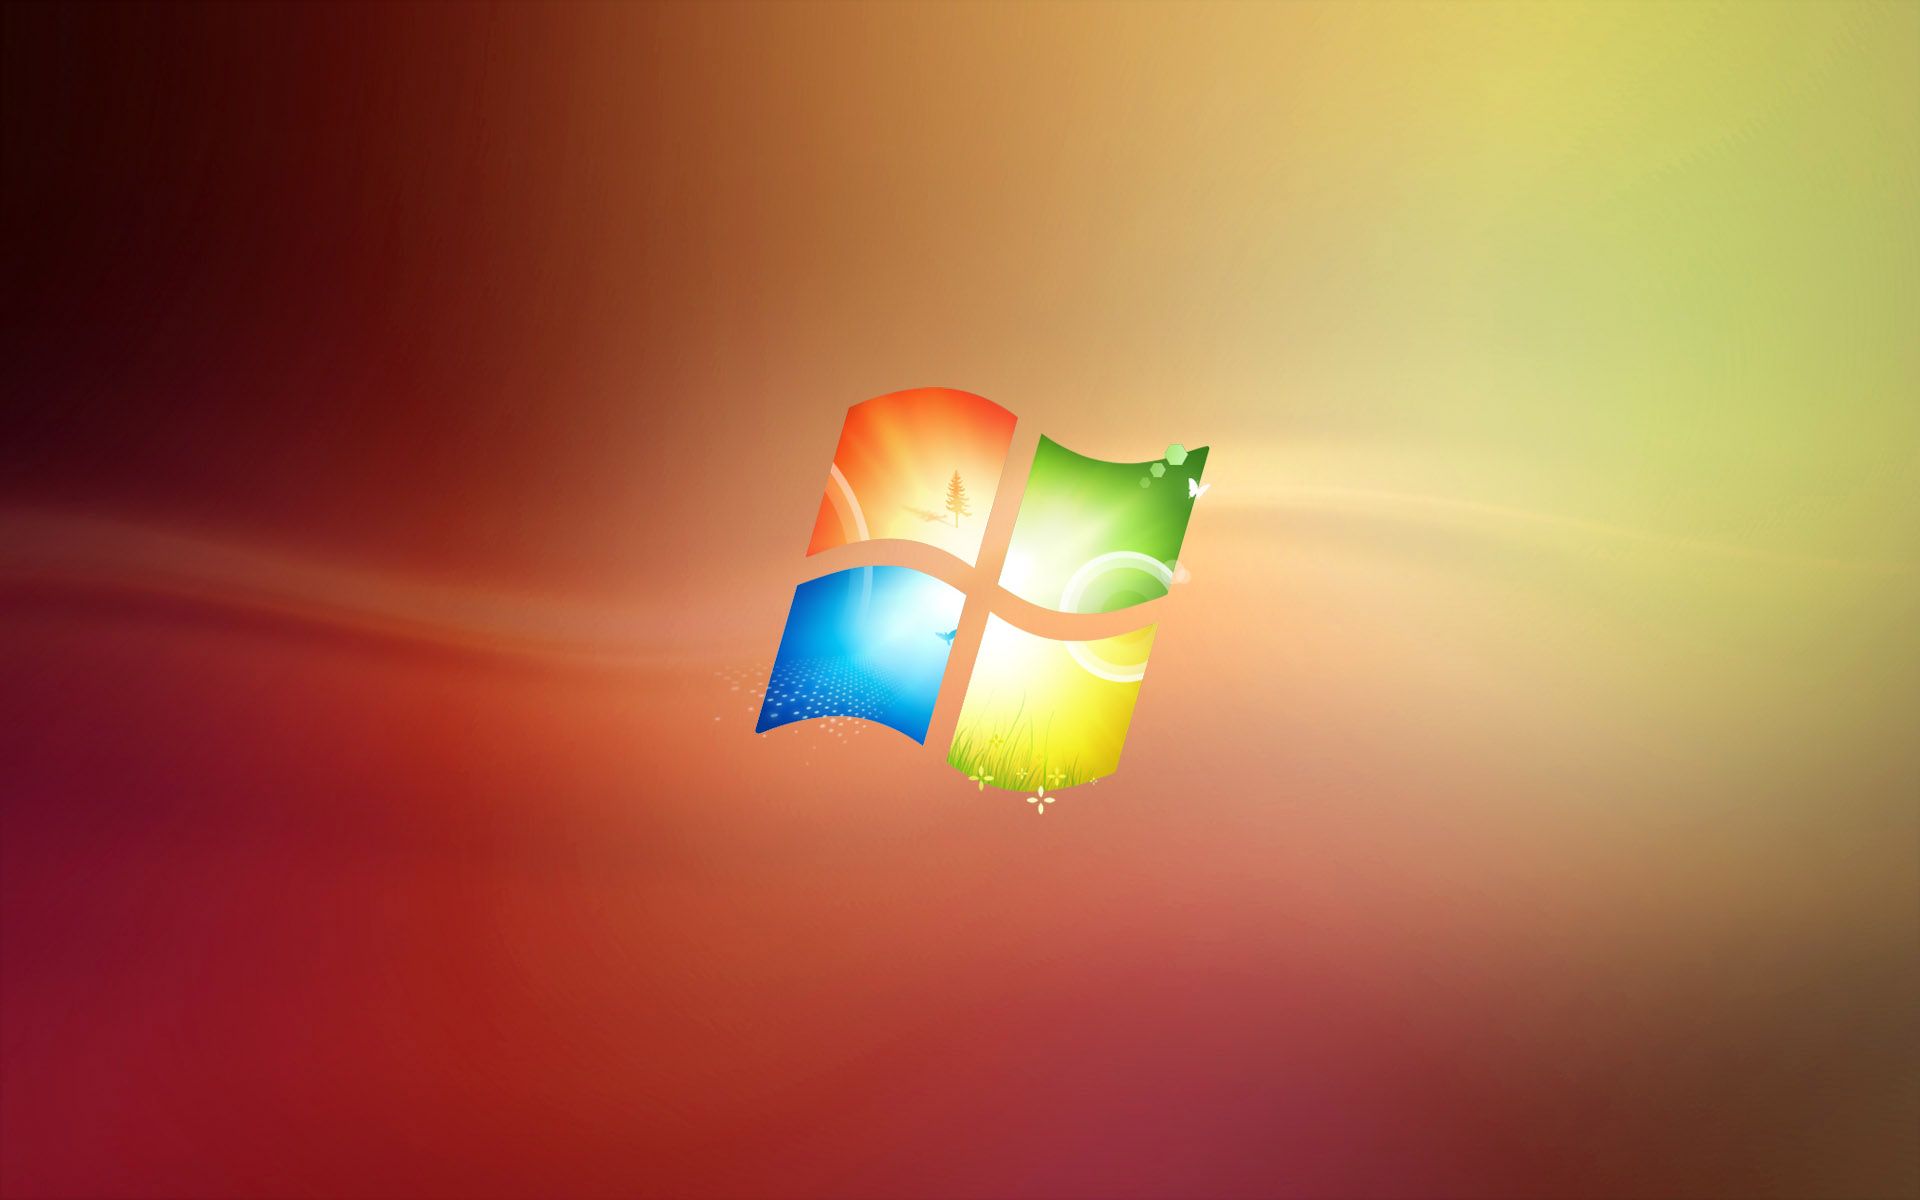 Windows 8 Cool Background | HD Brands and Logos Wallpapers for ...